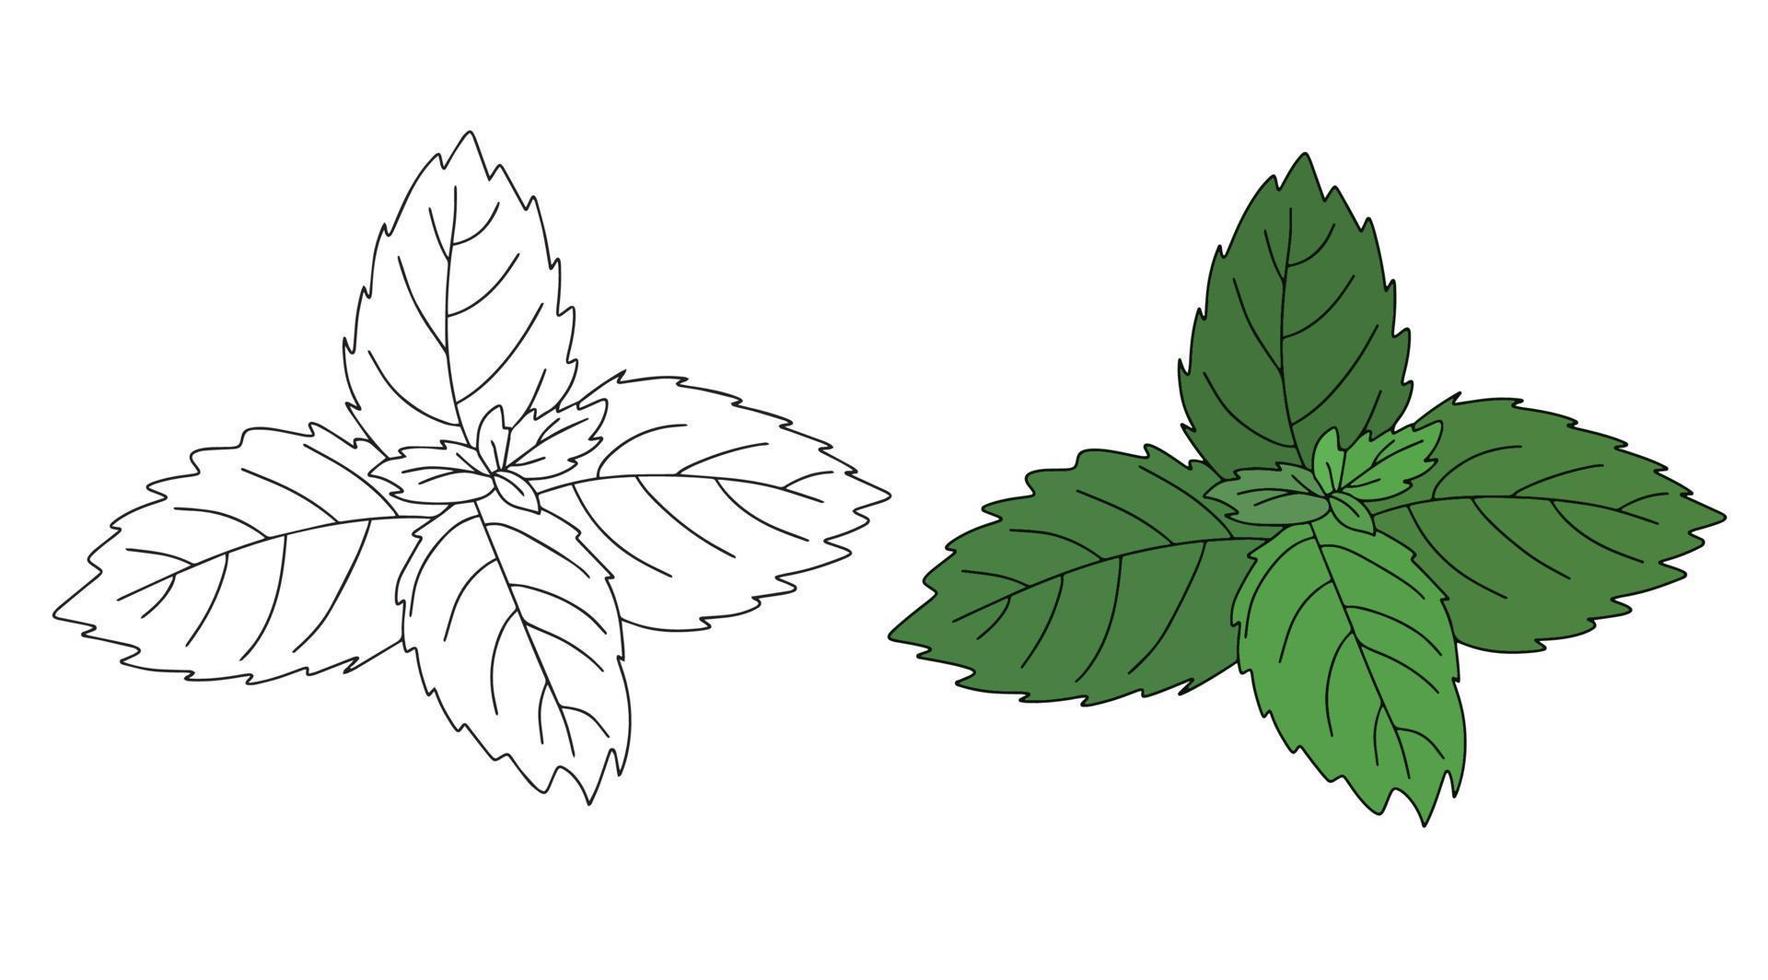 Mint leaf vector icon. Cartoon vector illustration of fresh mint. Isolated illustration of mint leaf icon in linear and flat style on white background